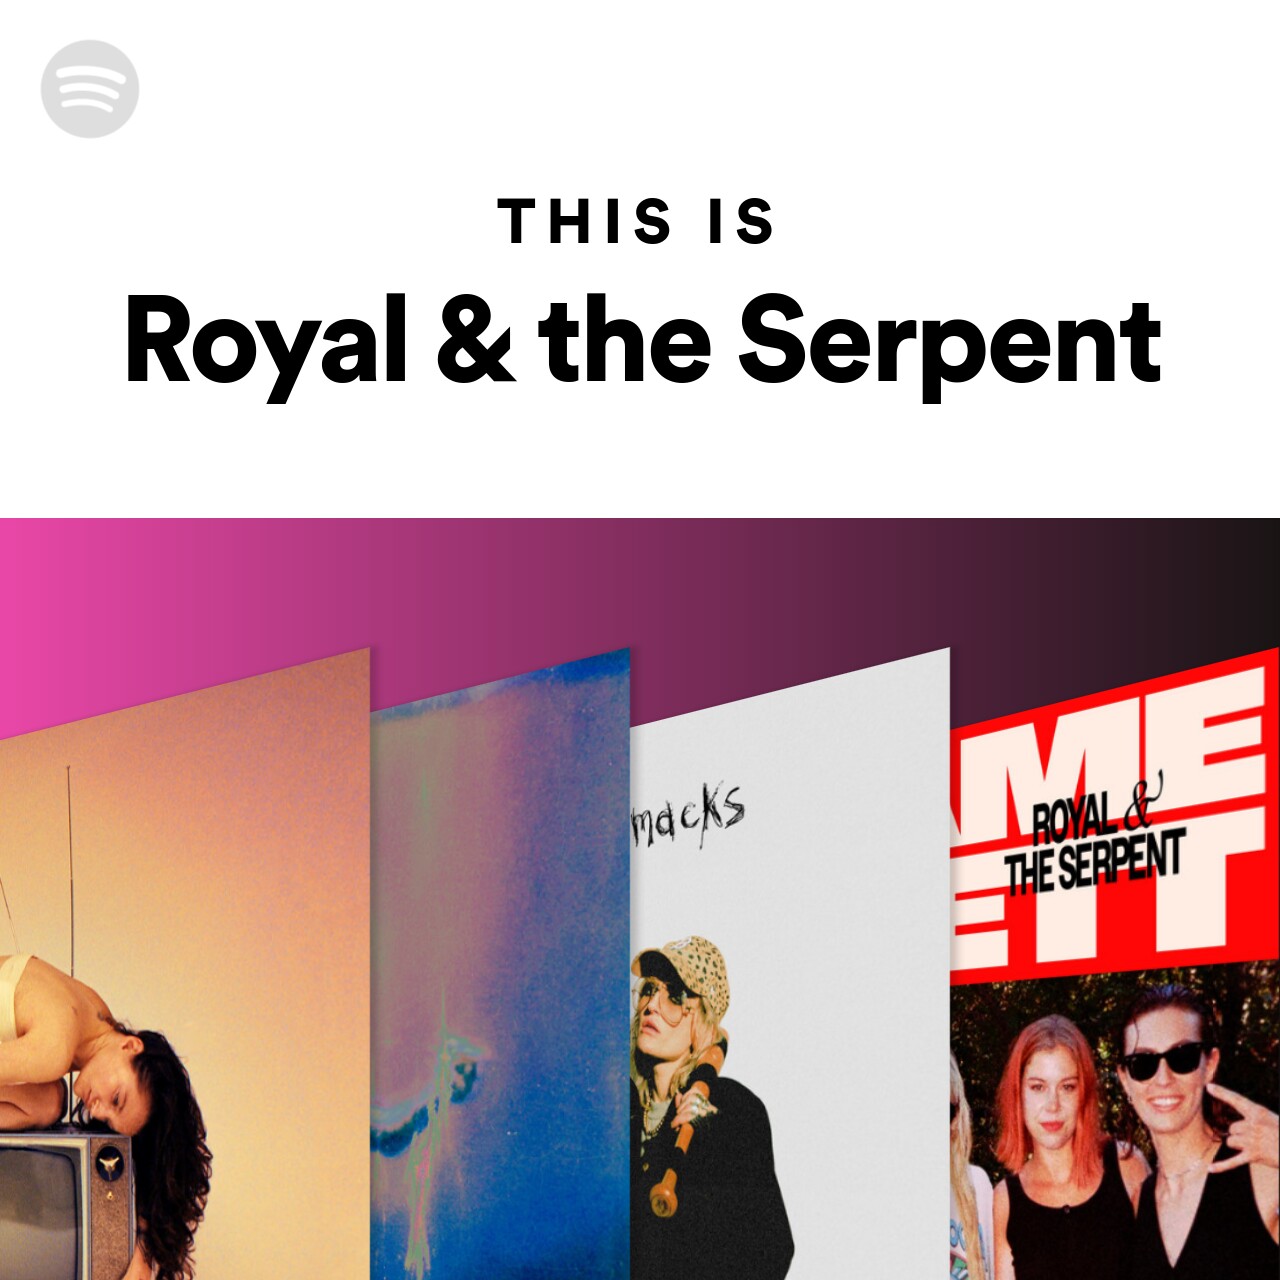 This Is Royal & the Serpent